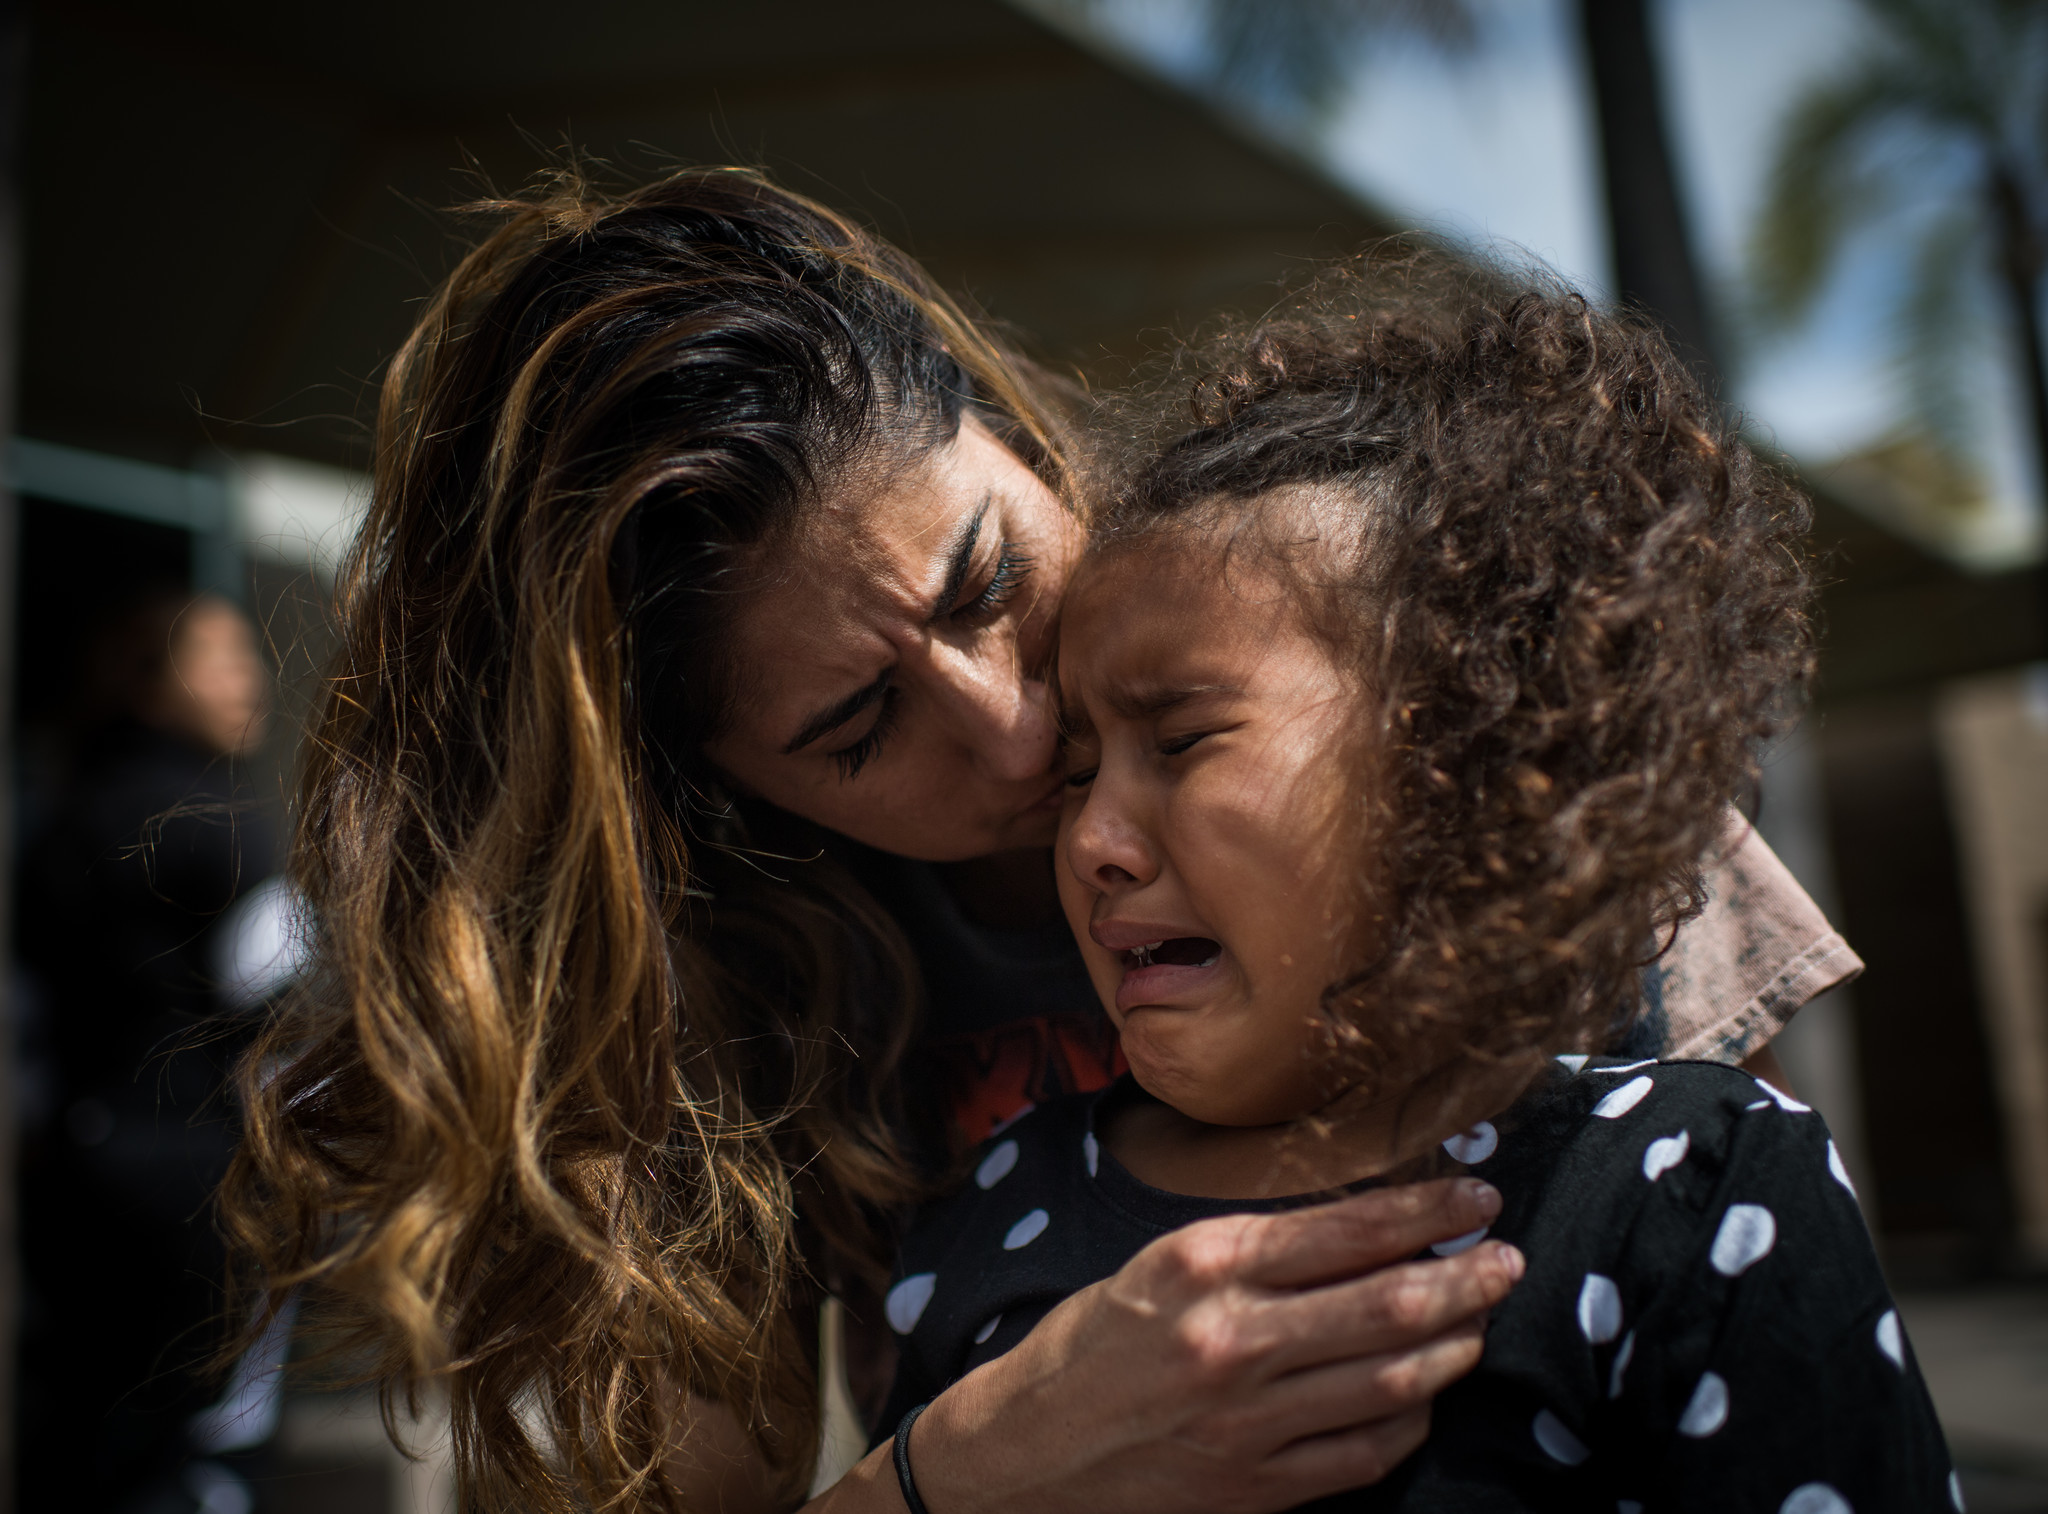 ORANGE, CA - June 23, 2018 Natalie Garcia tries to console her daughter Marley Hodges after a visit